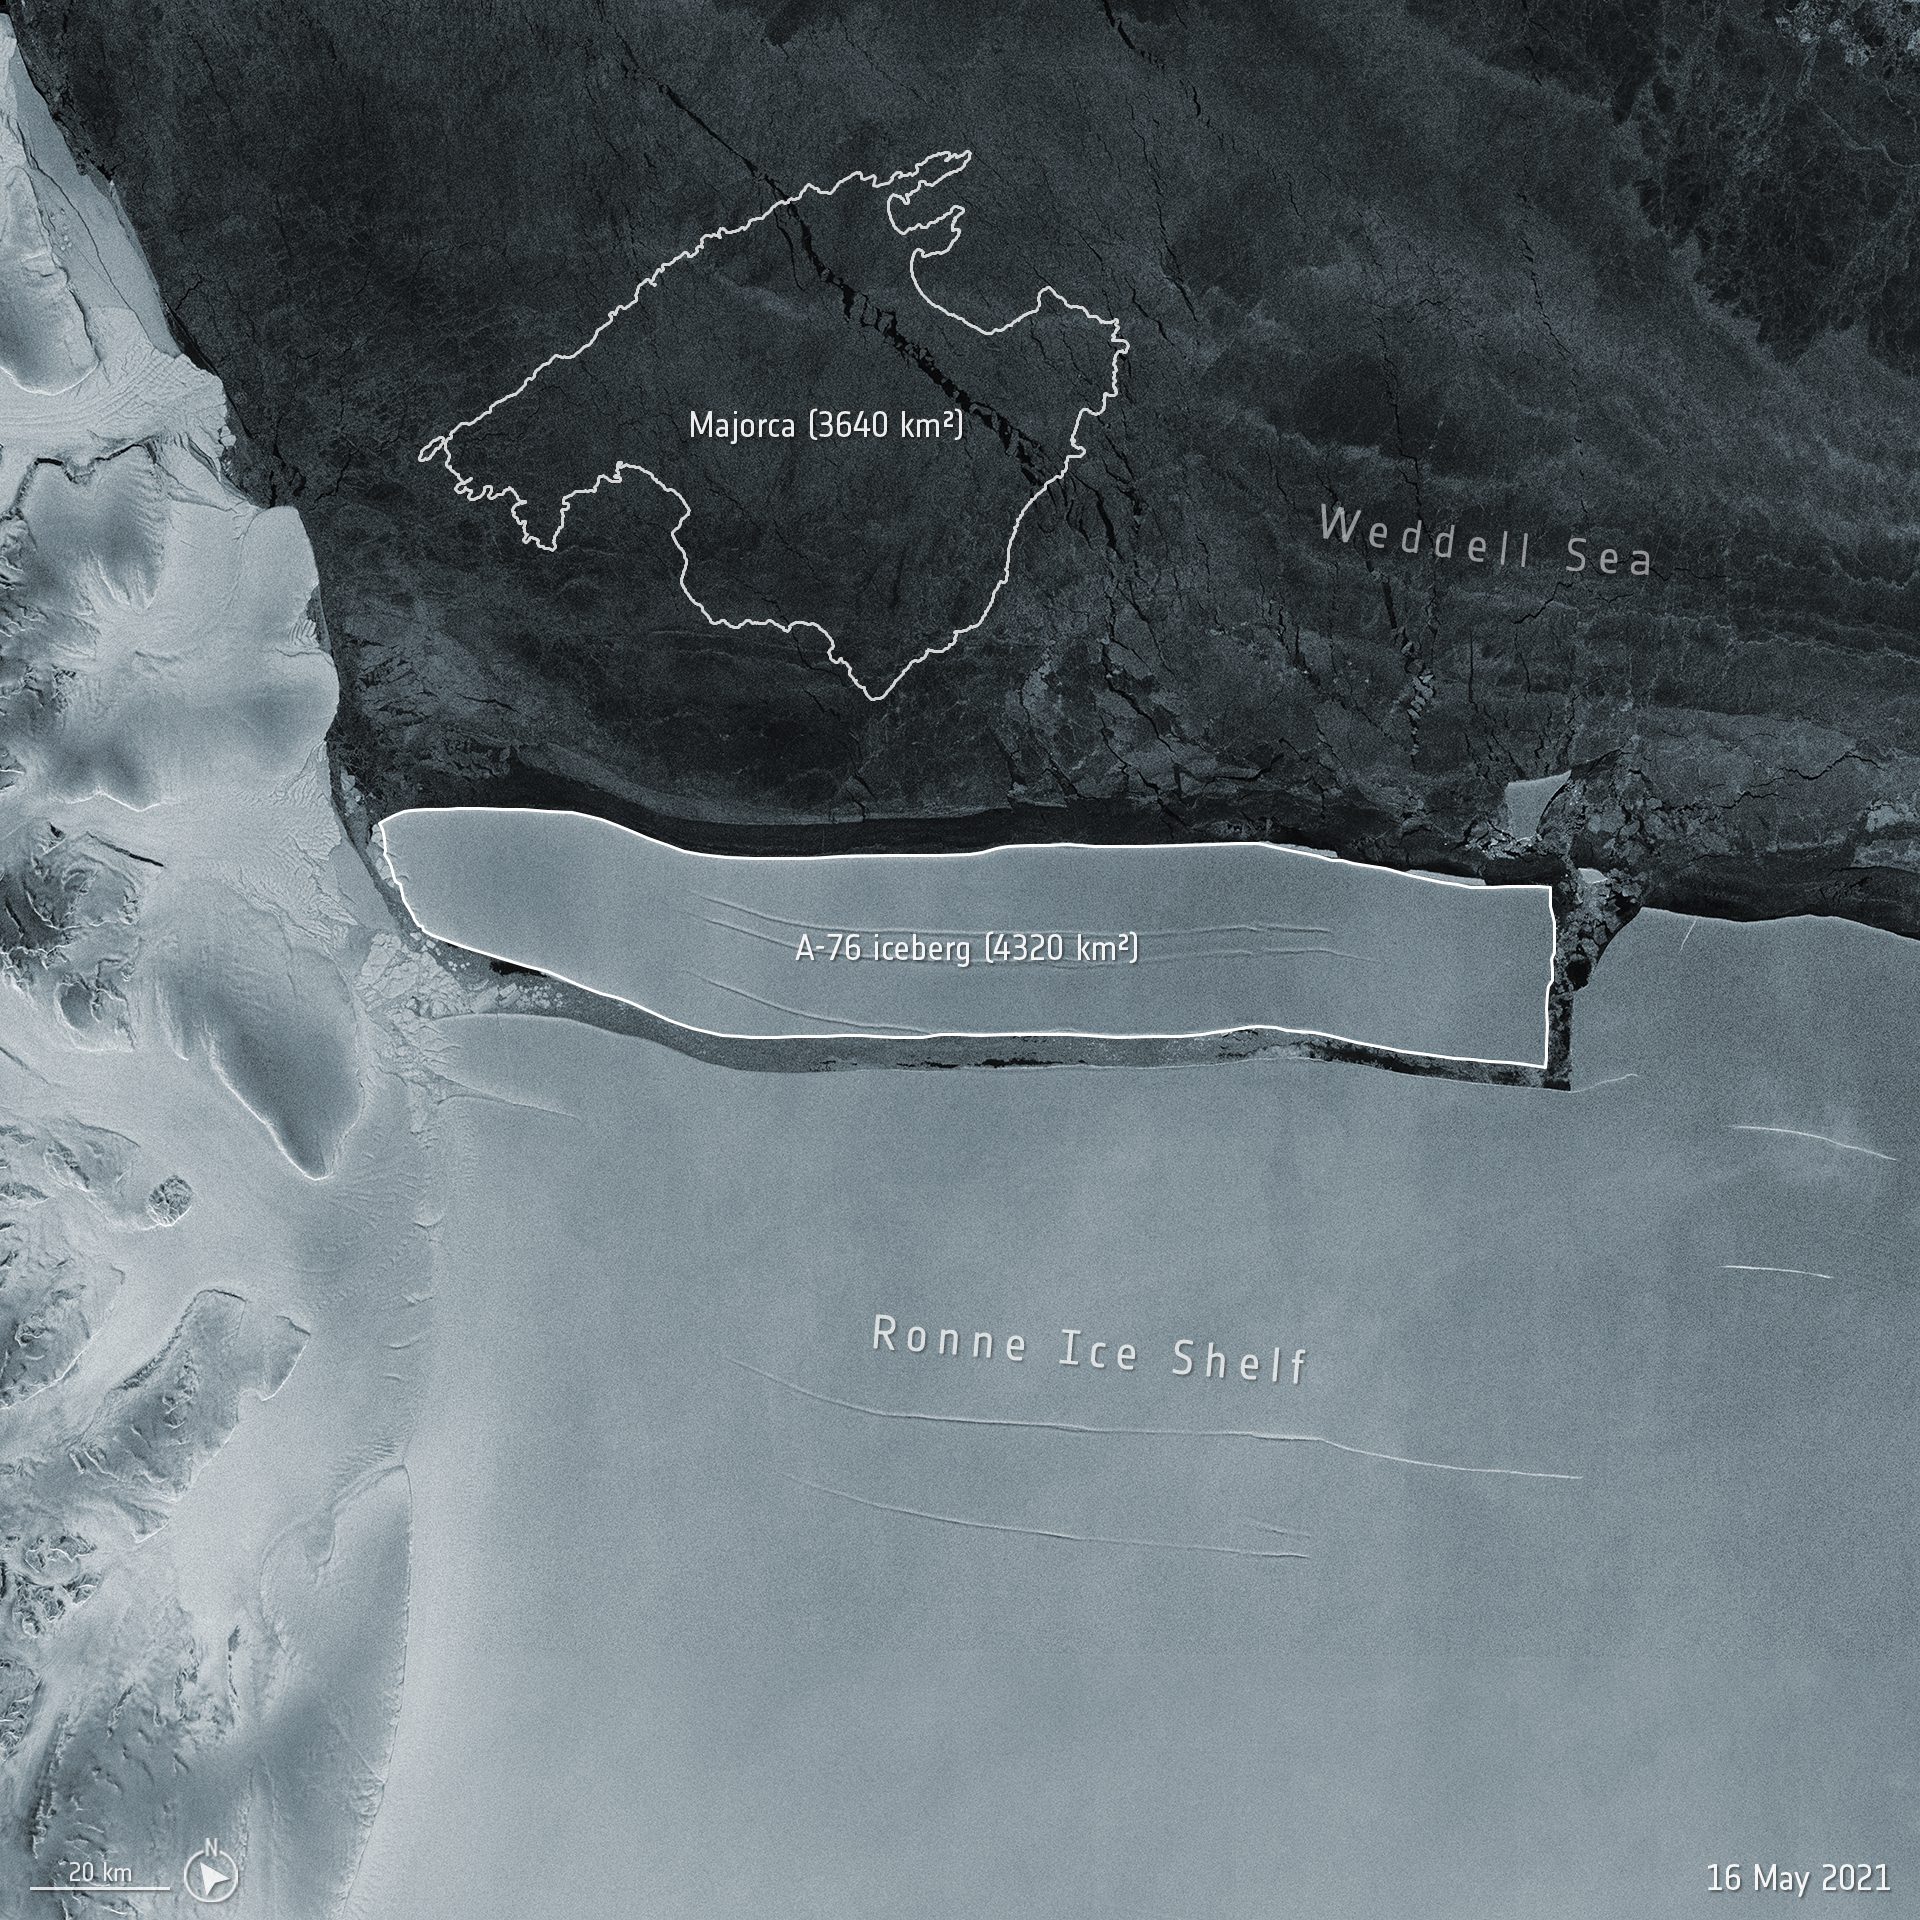 A-76 iceberg just after the calving event in May captured on satellite image. Size comparison to Majorca.